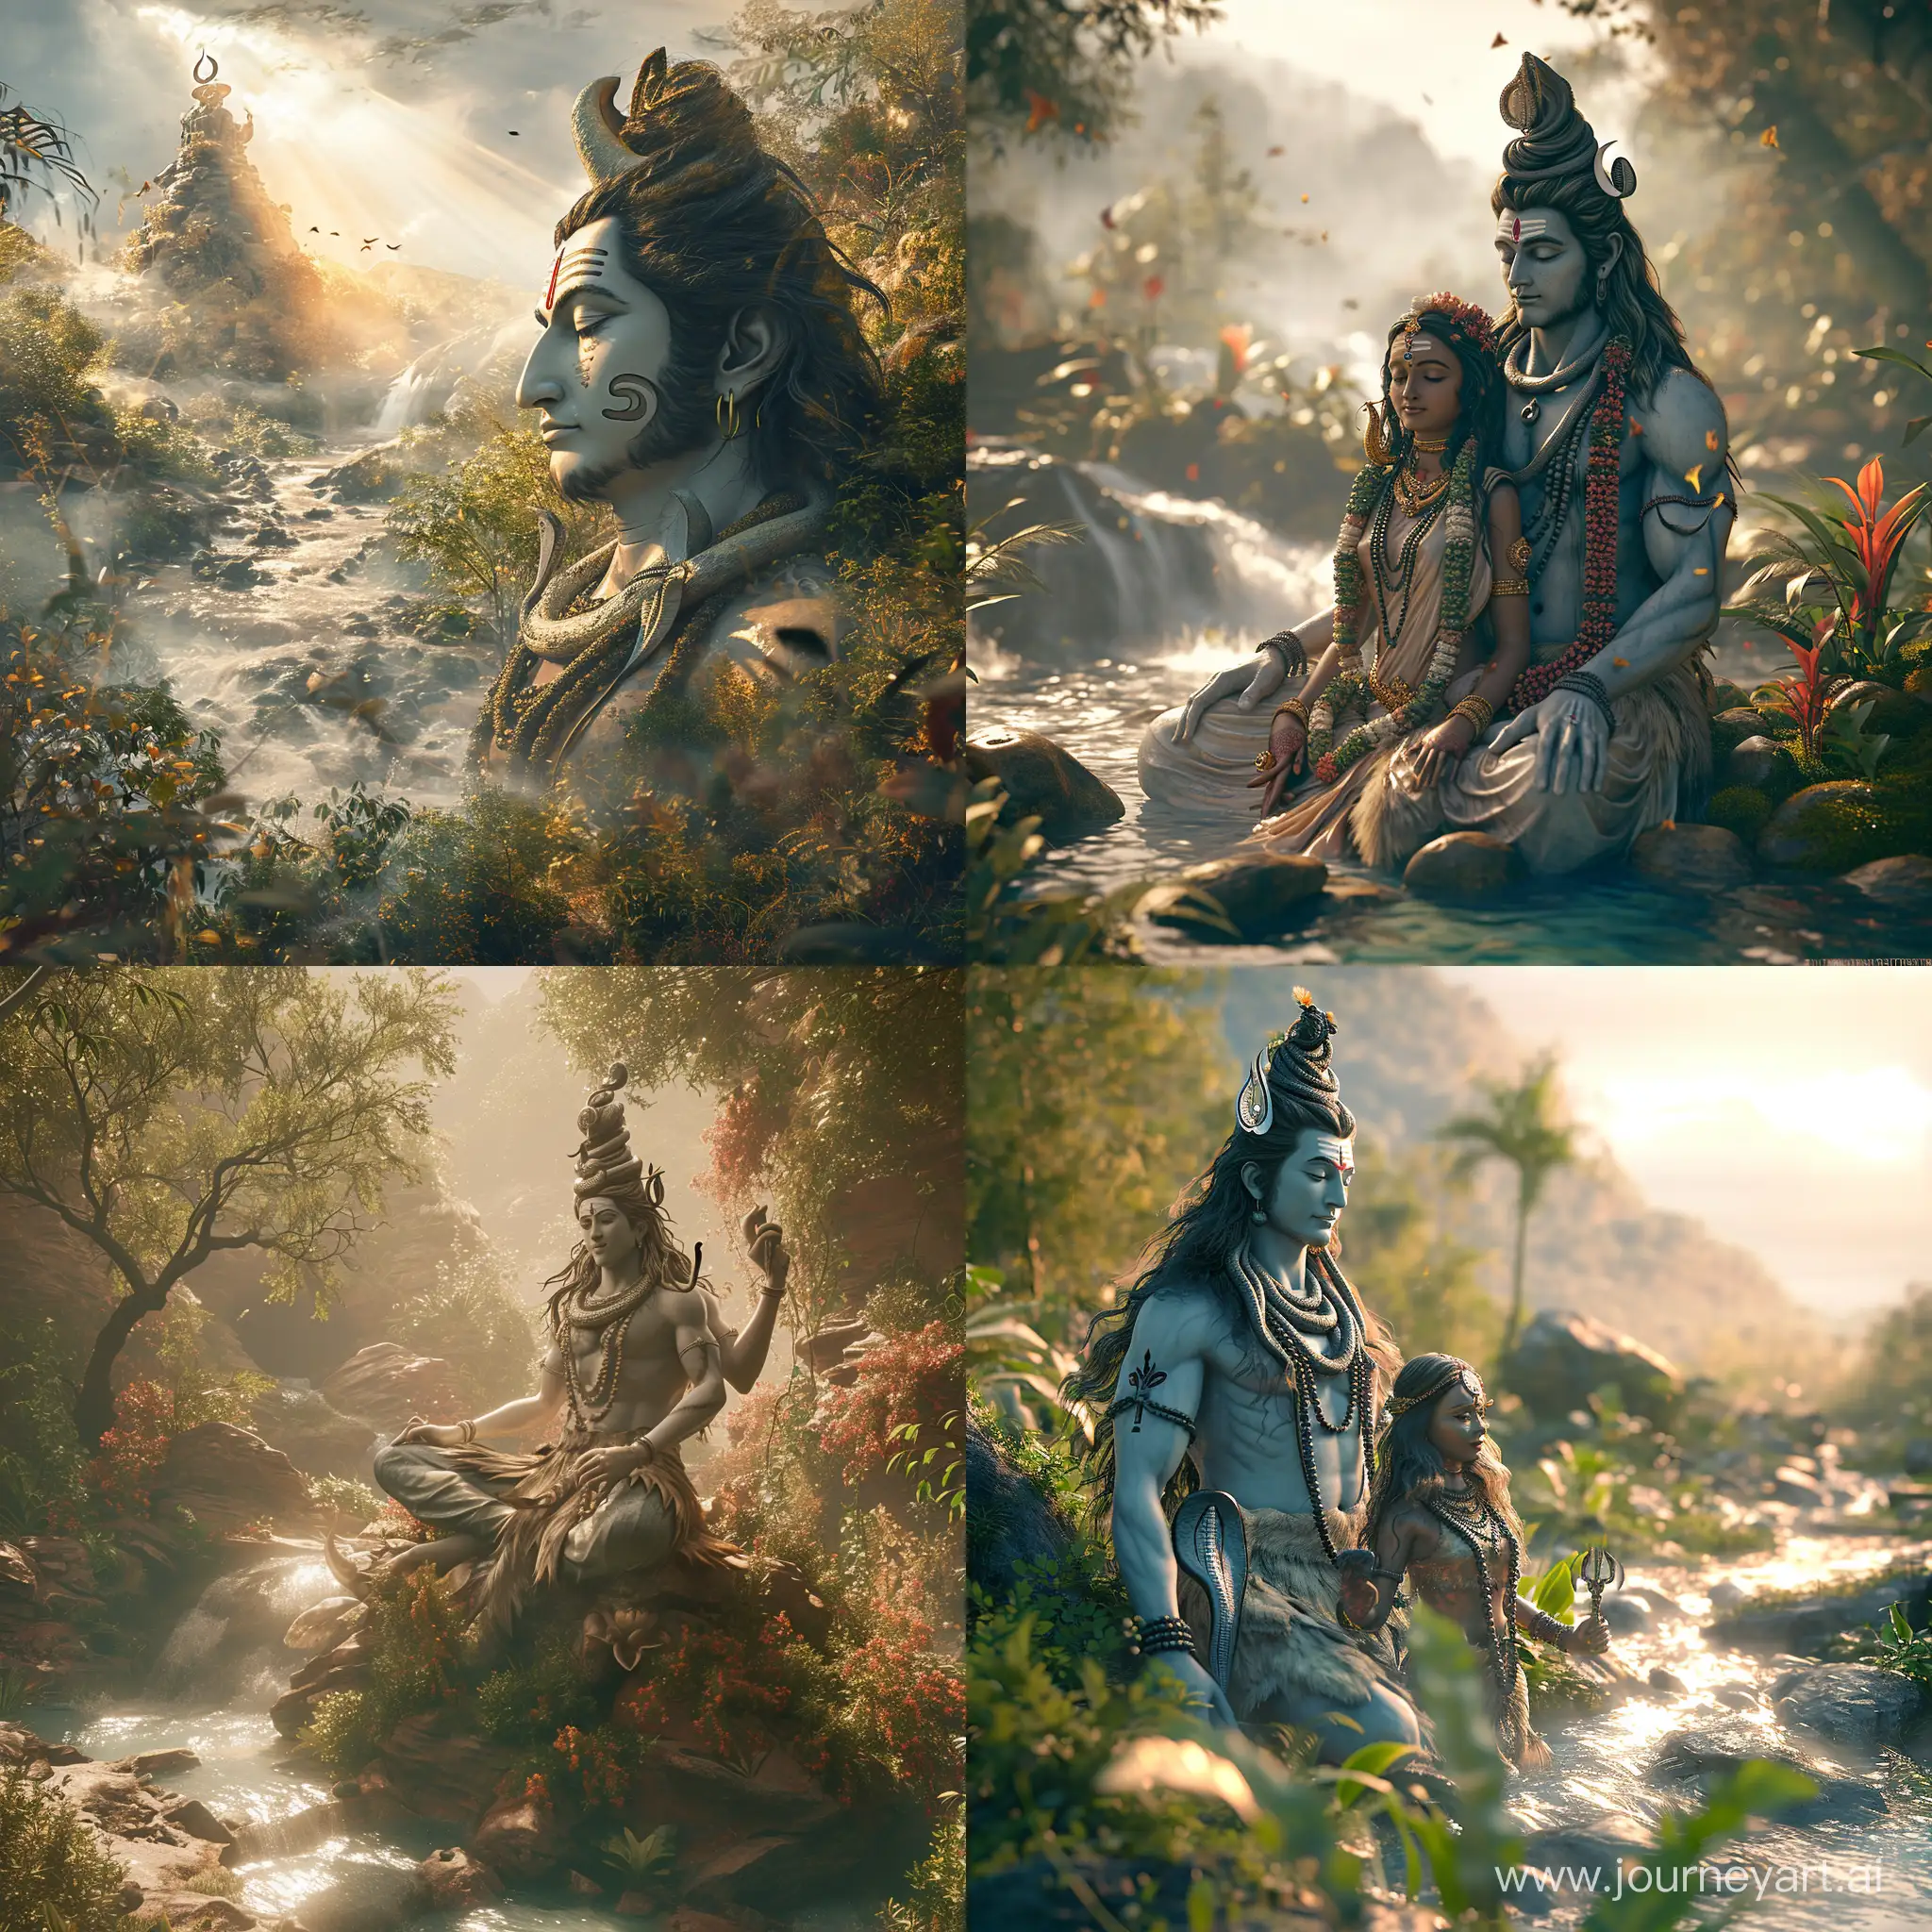 authentic scene of a Hindu deity ‘Lord Shiva’ and goddess ‘Parvati’ on a sacred journey, capturing the subtle play of light and shadows on the deity's ethereal form. Infuse the surroundings with realistic elements, like textured landscapes, flowing rivers, and lush flora, harmonizing the divine presence with the natural world in a seamless, awe-inspiring composition, realistic, hd graphics, unreal engine, hyper realistic, cinematic lighting